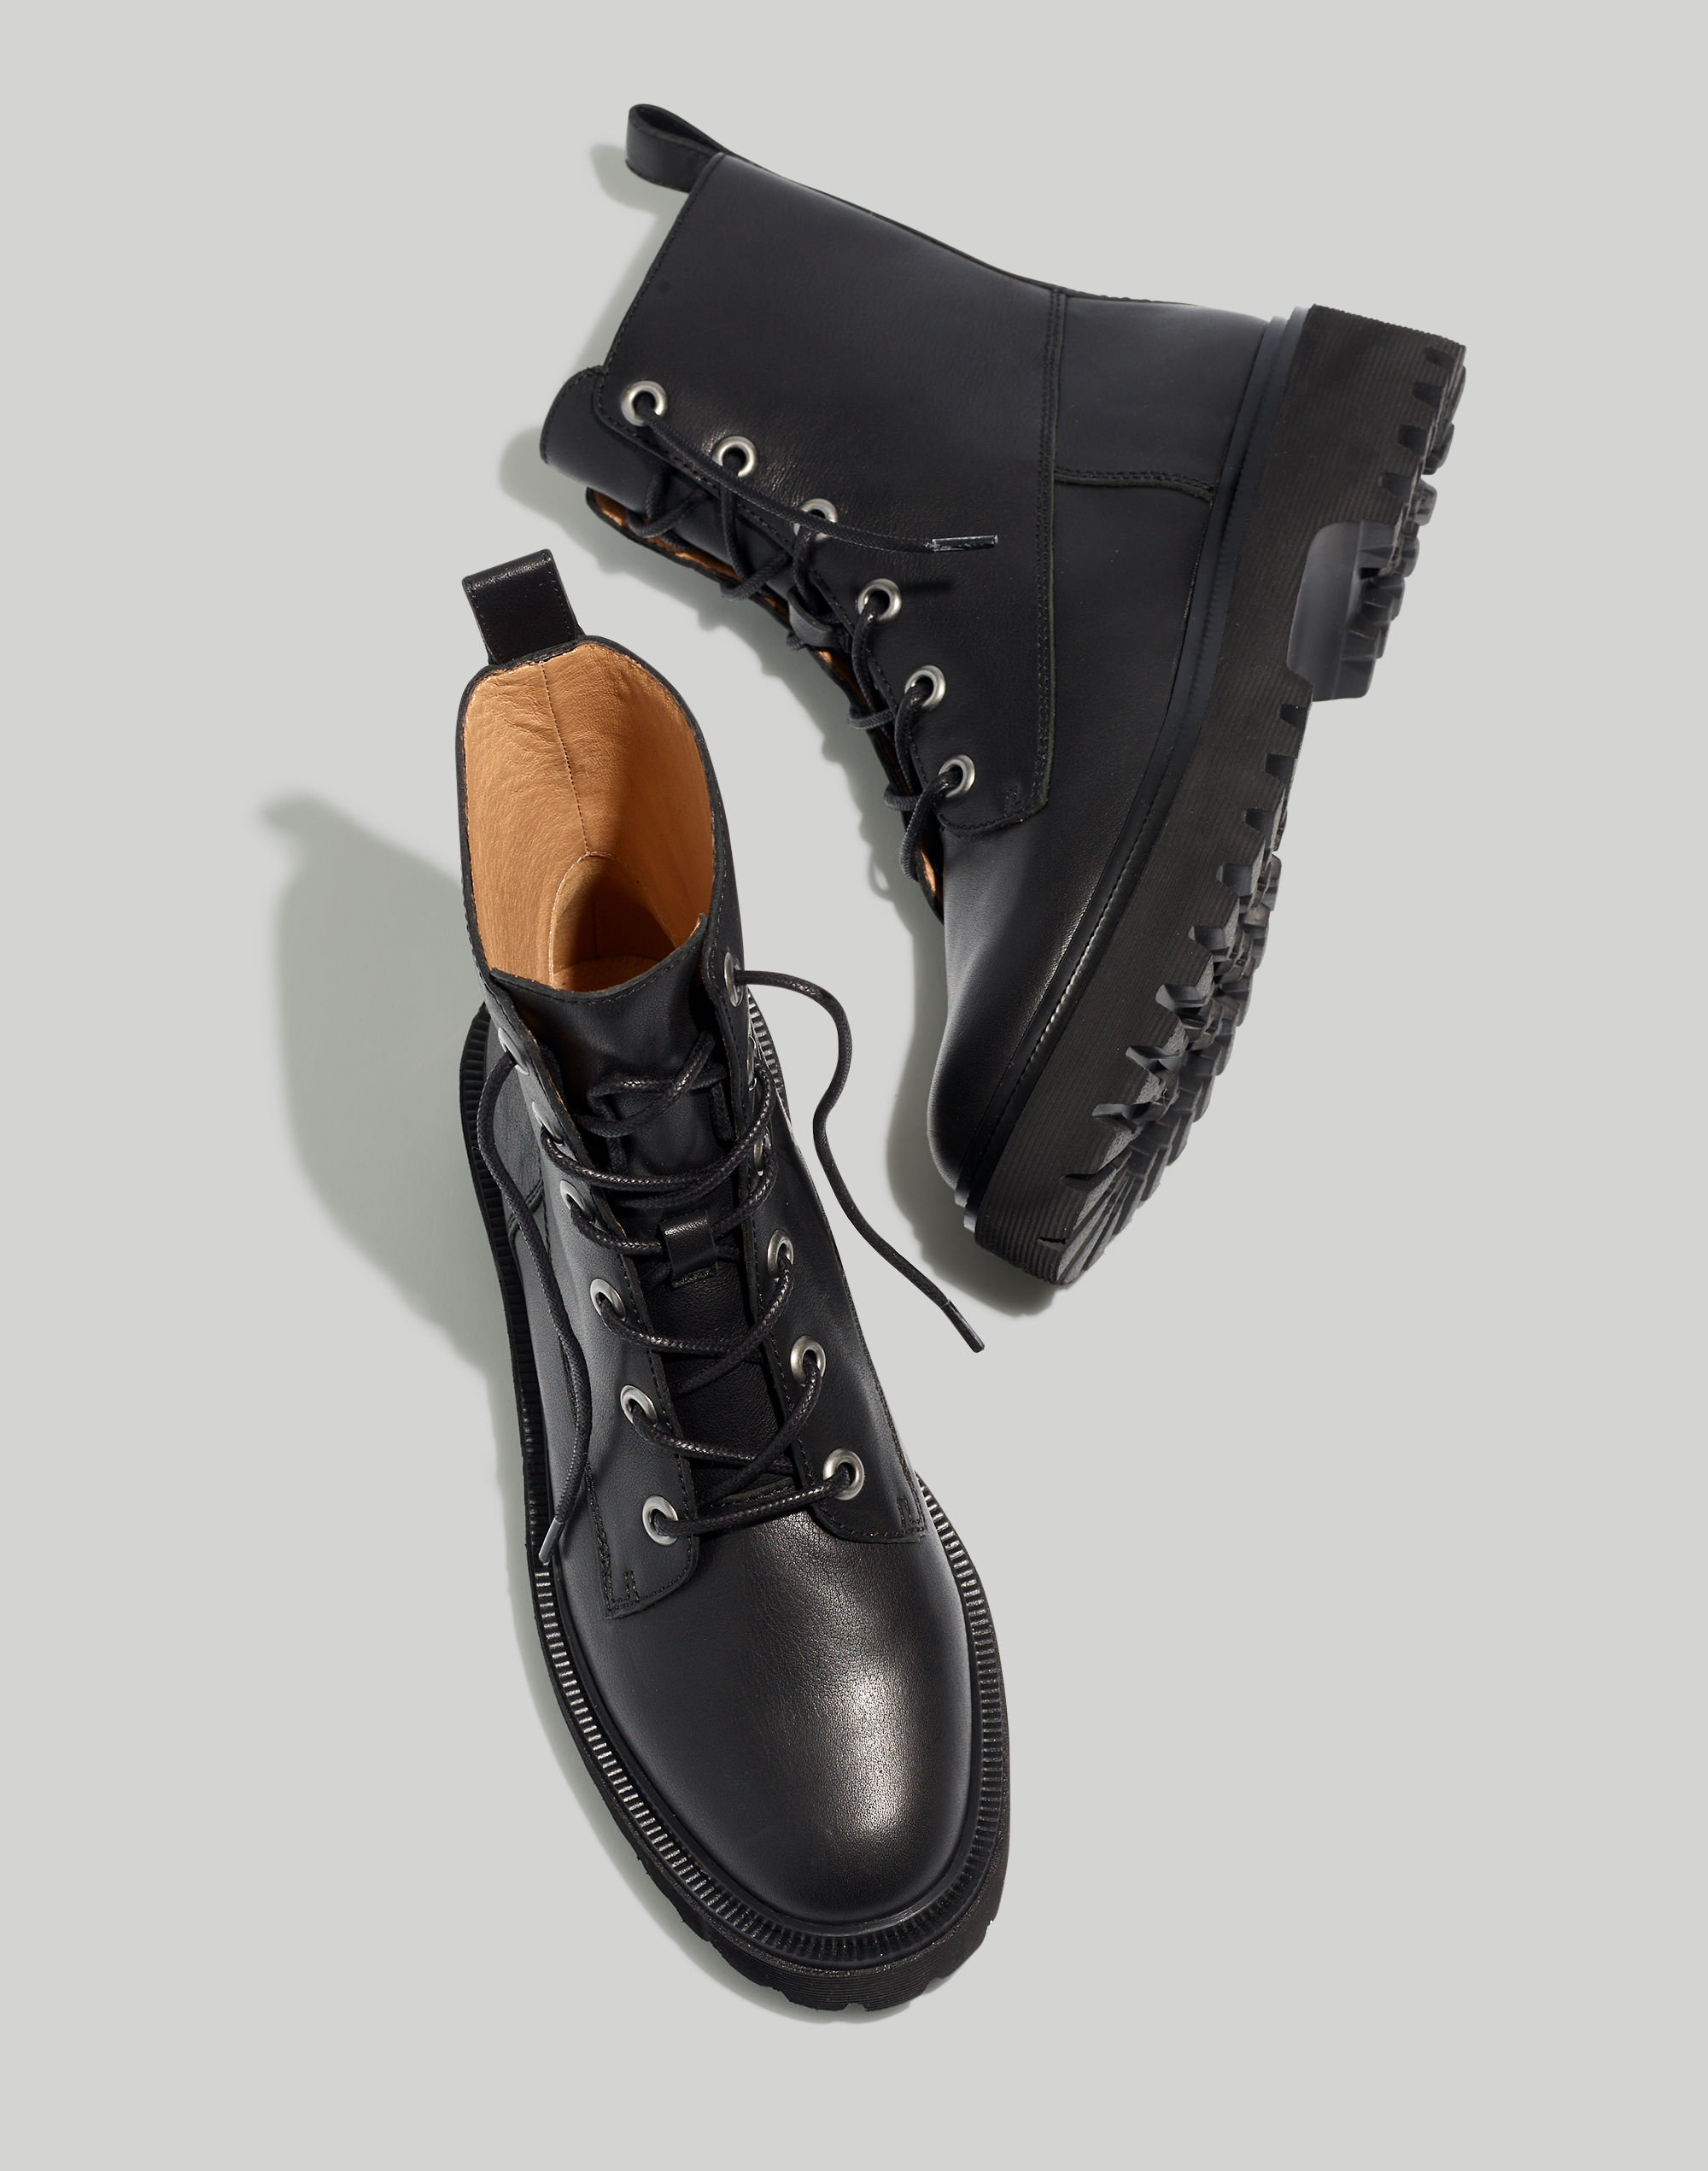 The Rayna Lace-Up Boot Leather